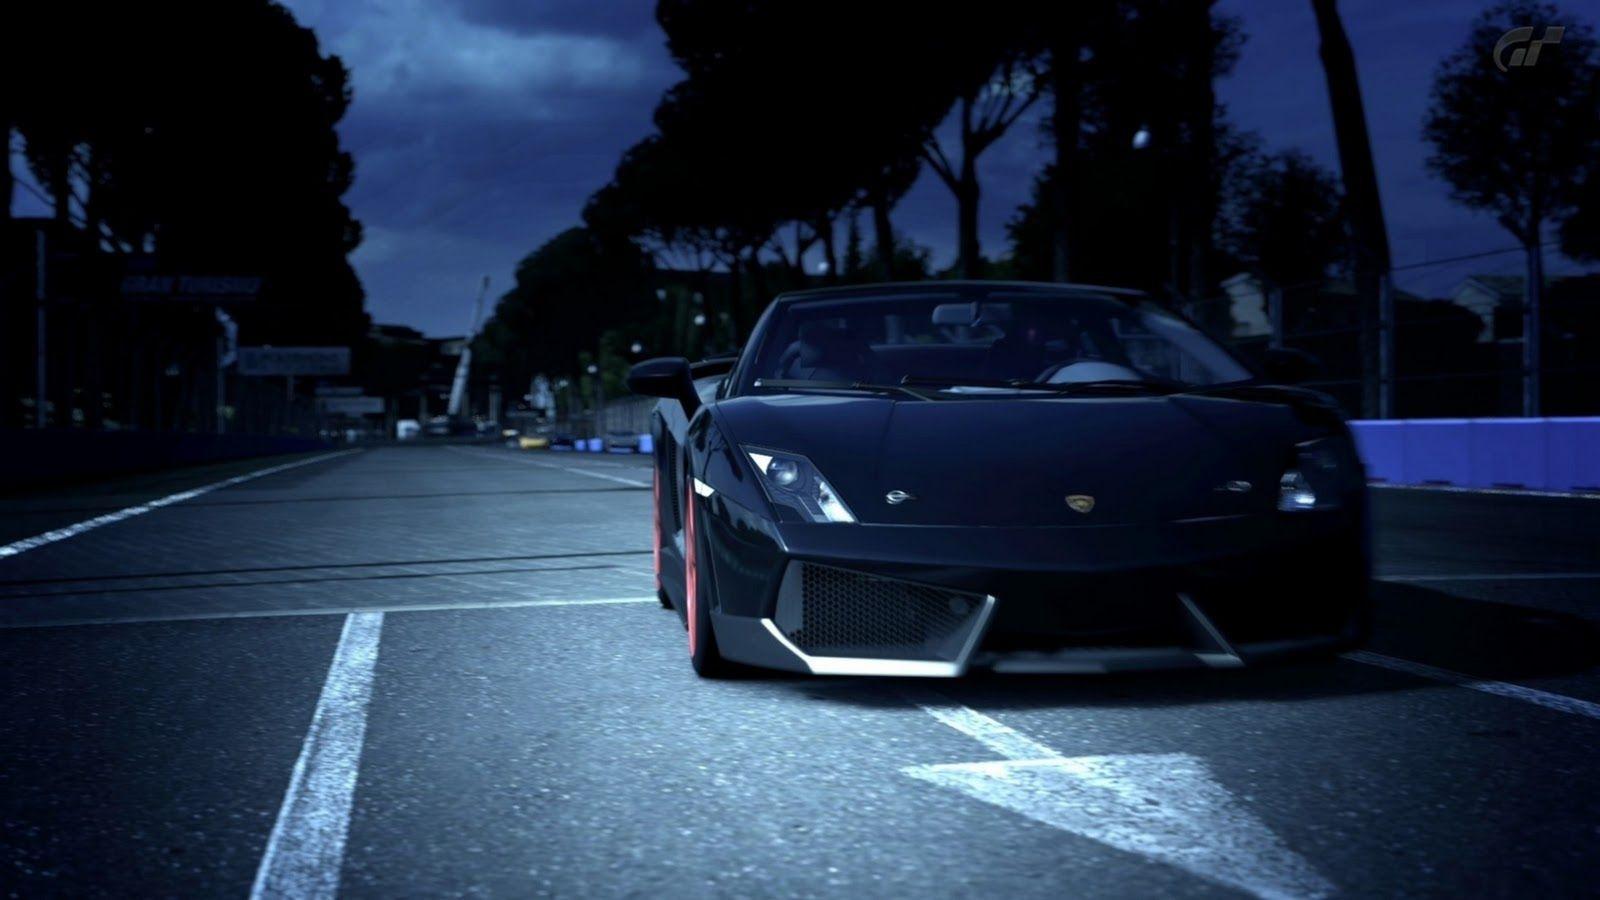 3D Moving Wallpaper High Quality. Moving wallpaper, Sports car wallpaper, Car wallpaper